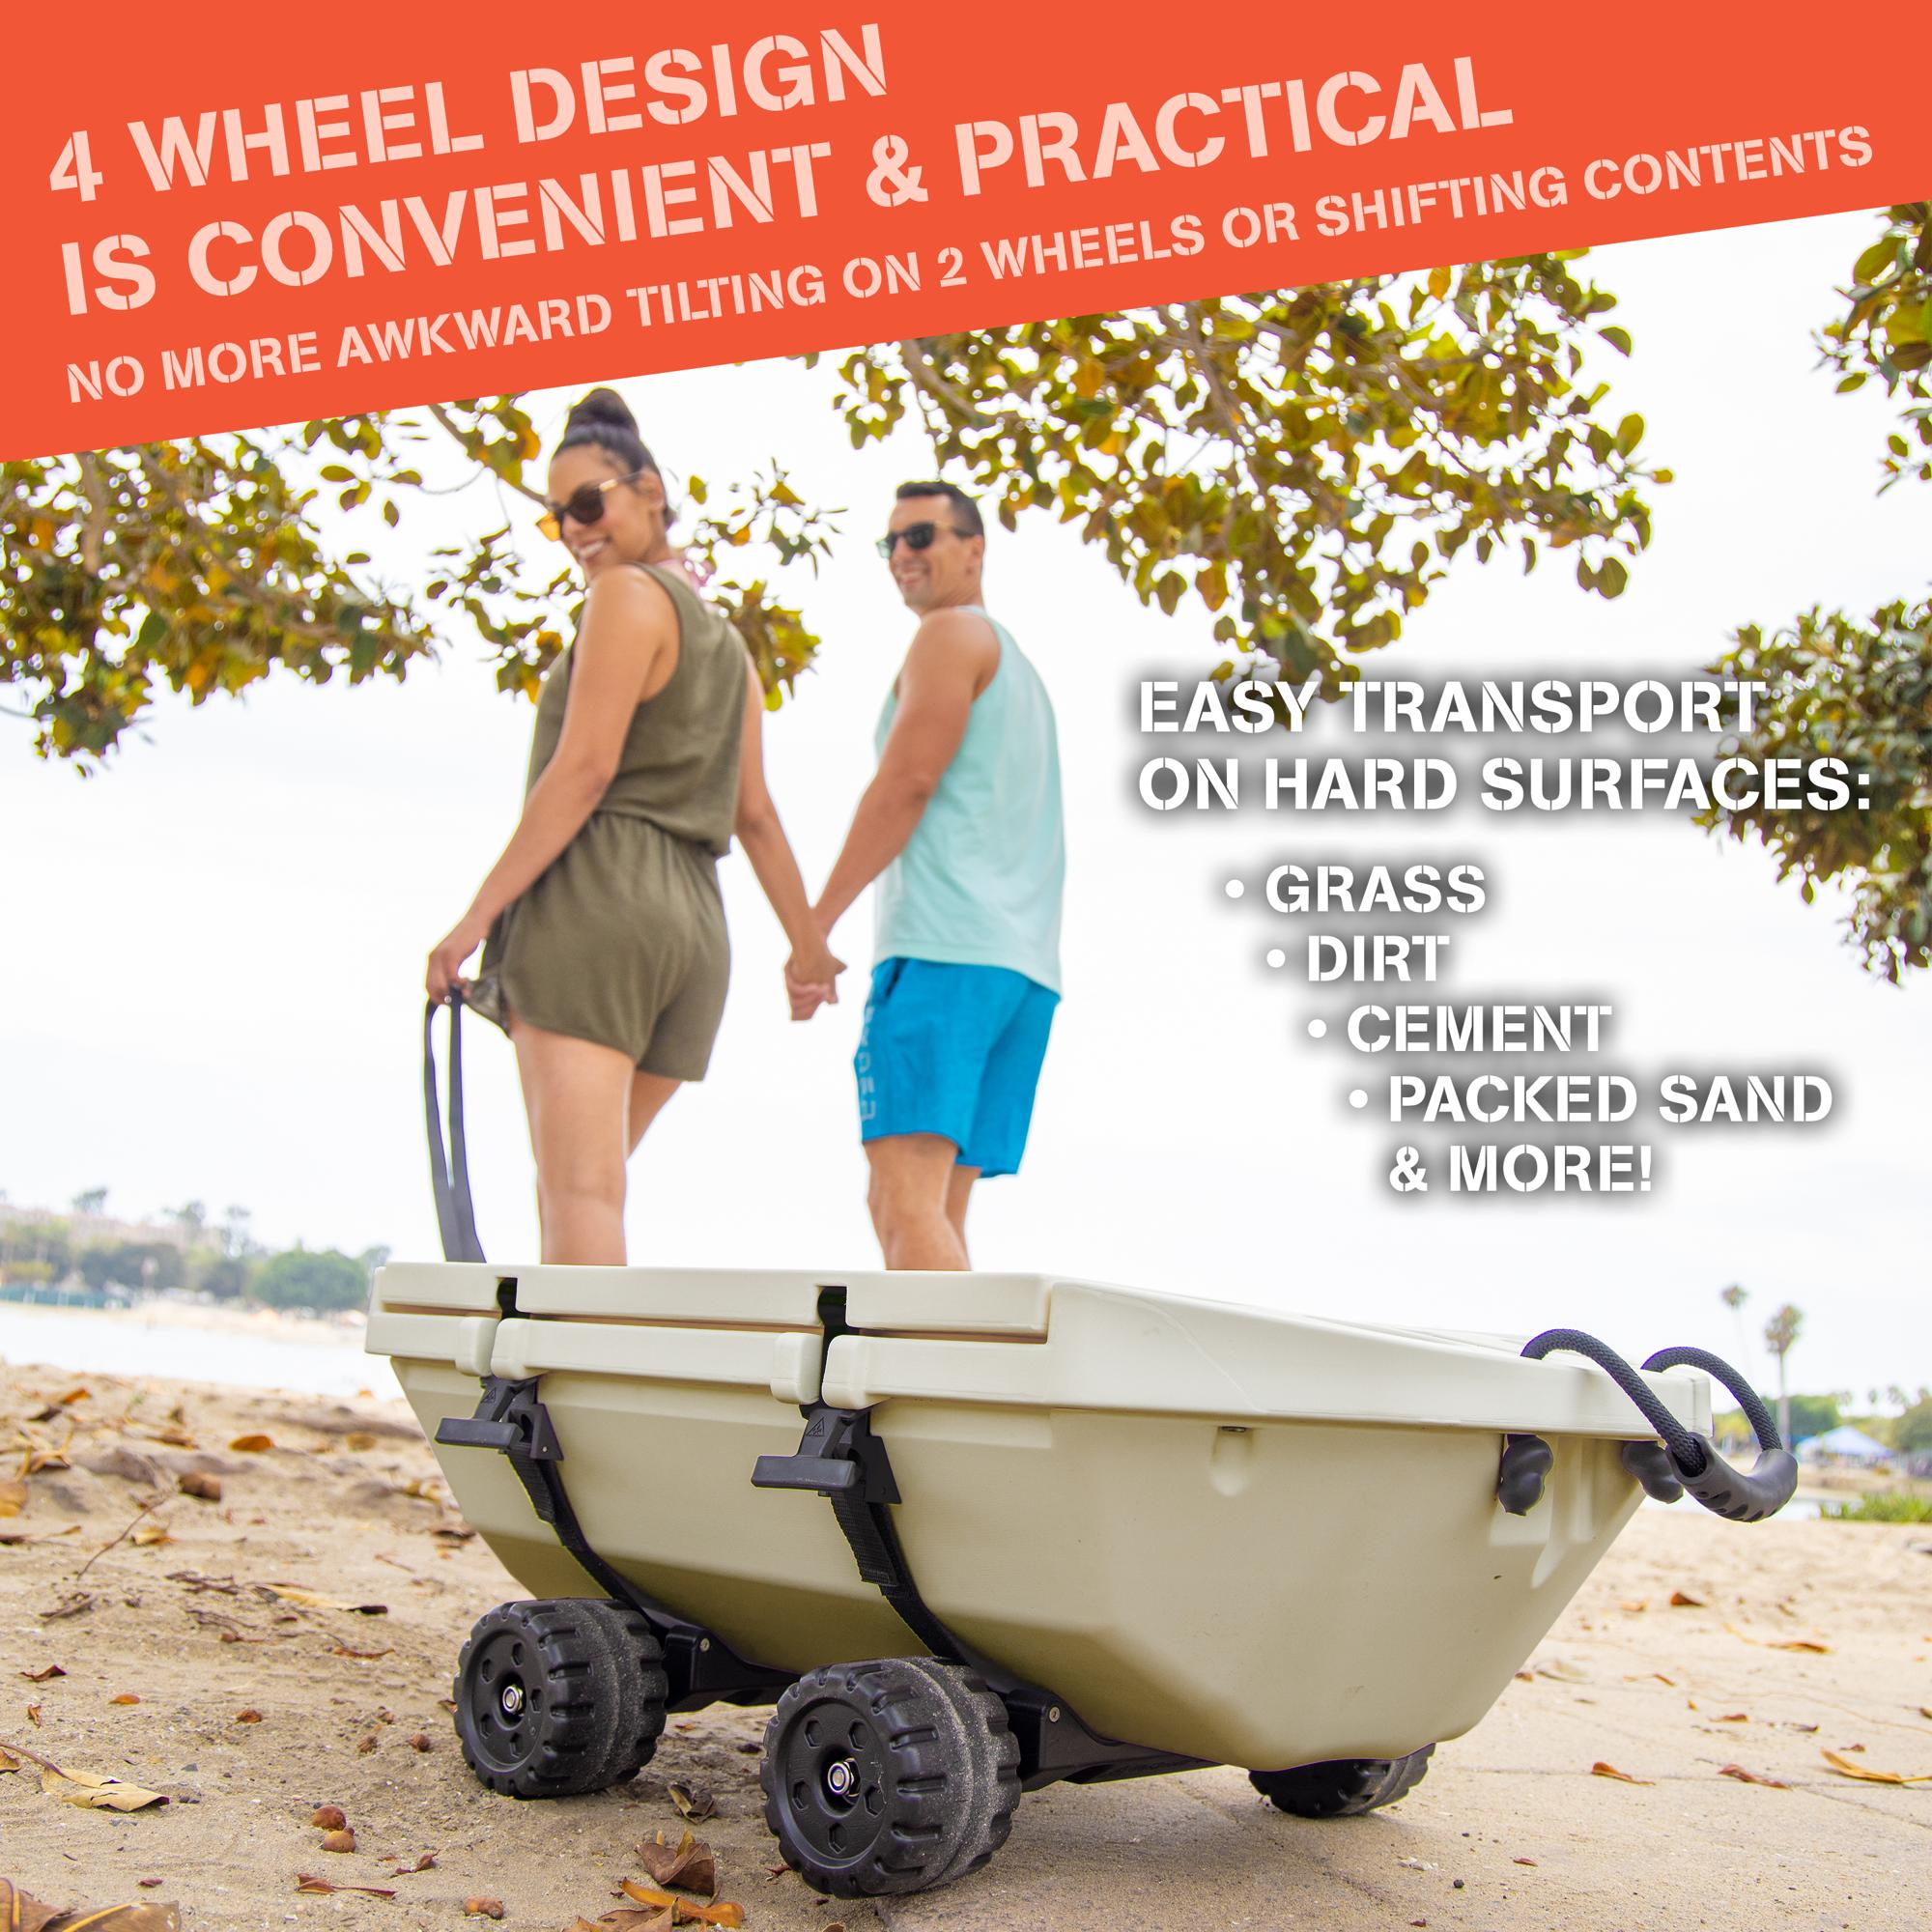 Cuddy 40 qt Floating Cooler and Dry Storage Vessel with Cuddy Crawler Wheel Kit - Tan